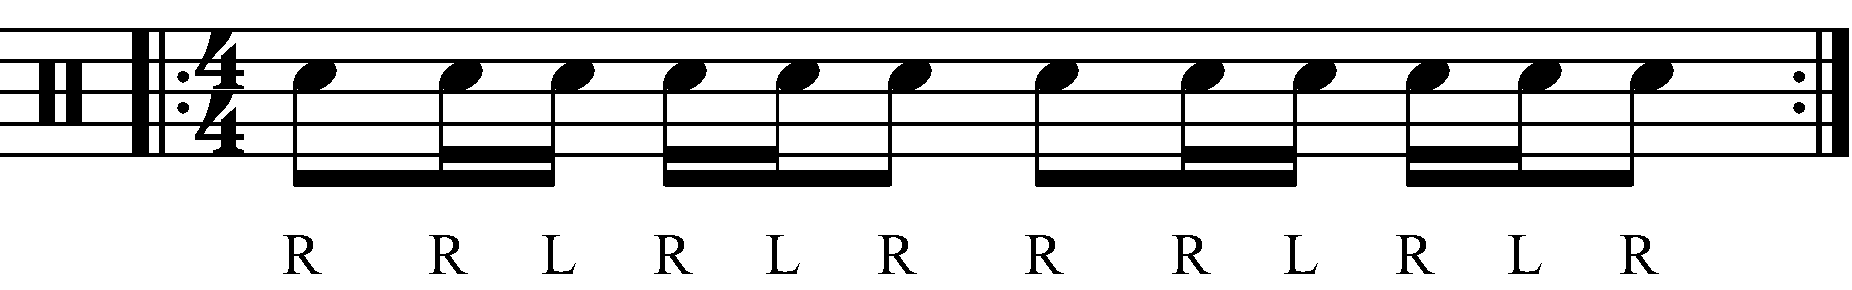 16th Note to 32nd Note hand speed exercise.